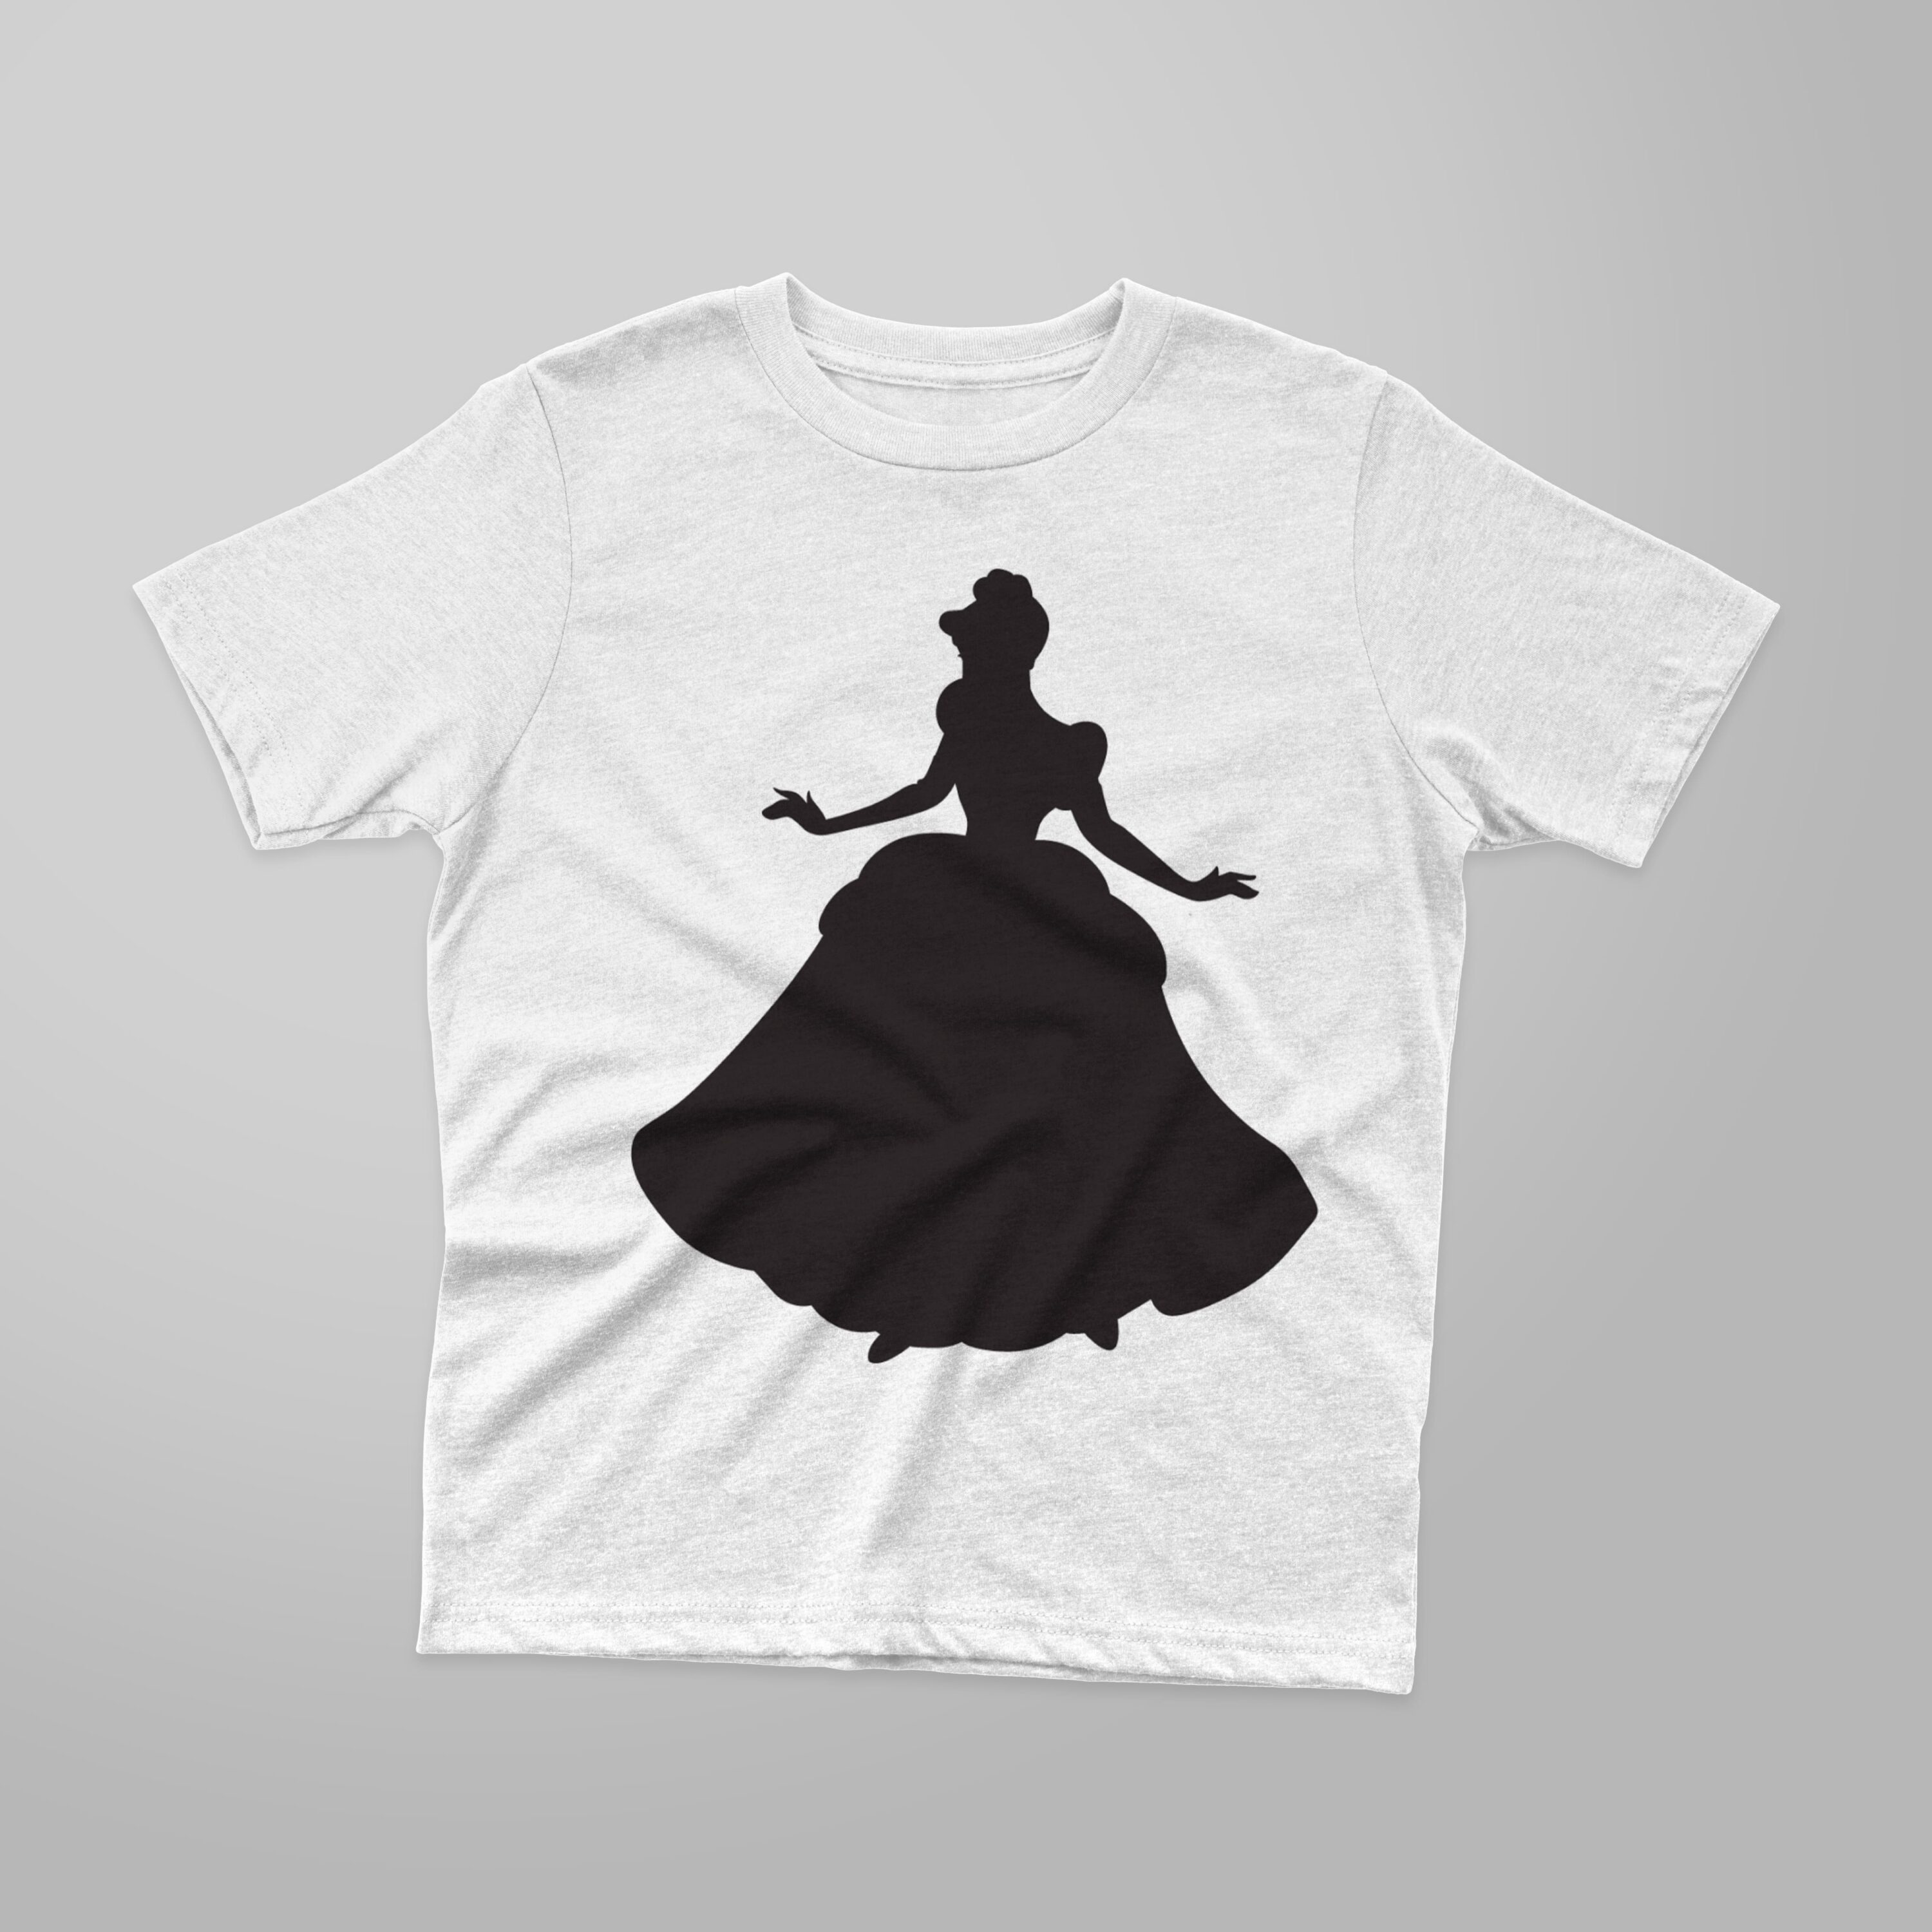 Image of a white t-shirt with an irresistible Cinderella silhouette print.